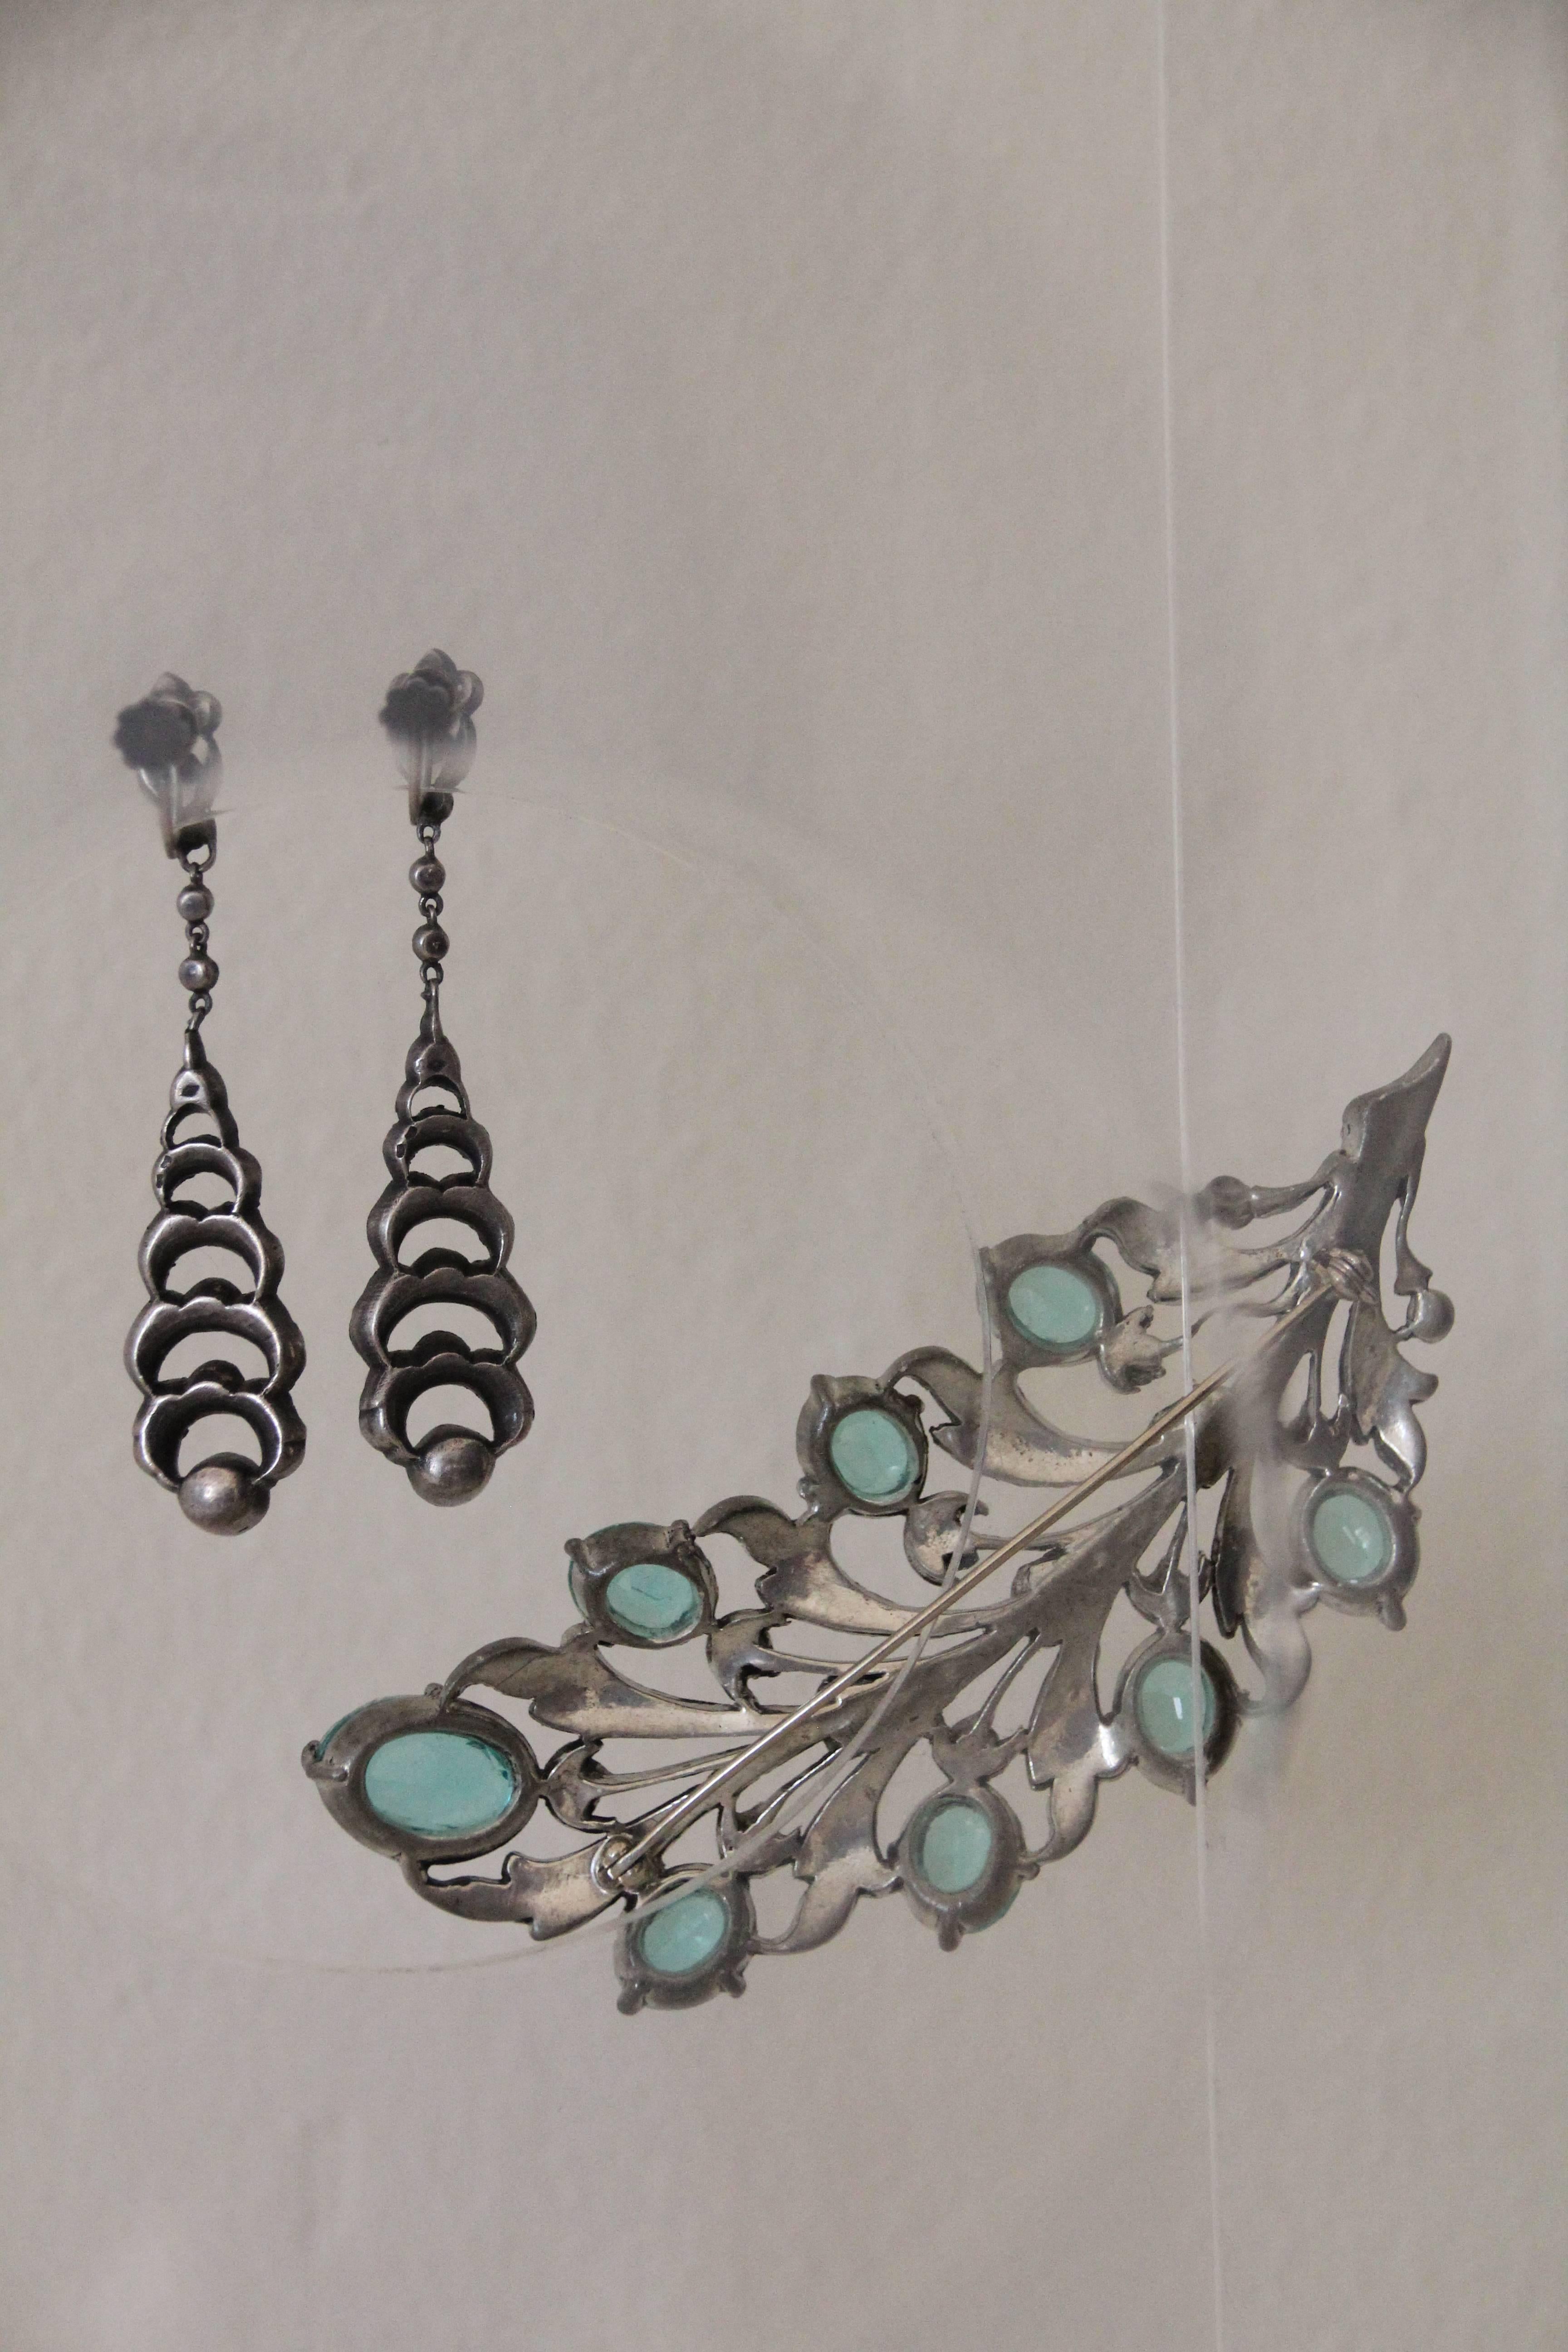 A gorgeous 1930s brooch and earring set: Aquamarine-toned and clear rhinestone leaf or feather brooch with japanned settings, come with matching pair of teardrop shape rhinestone dangle earrings.  Brooch is 4